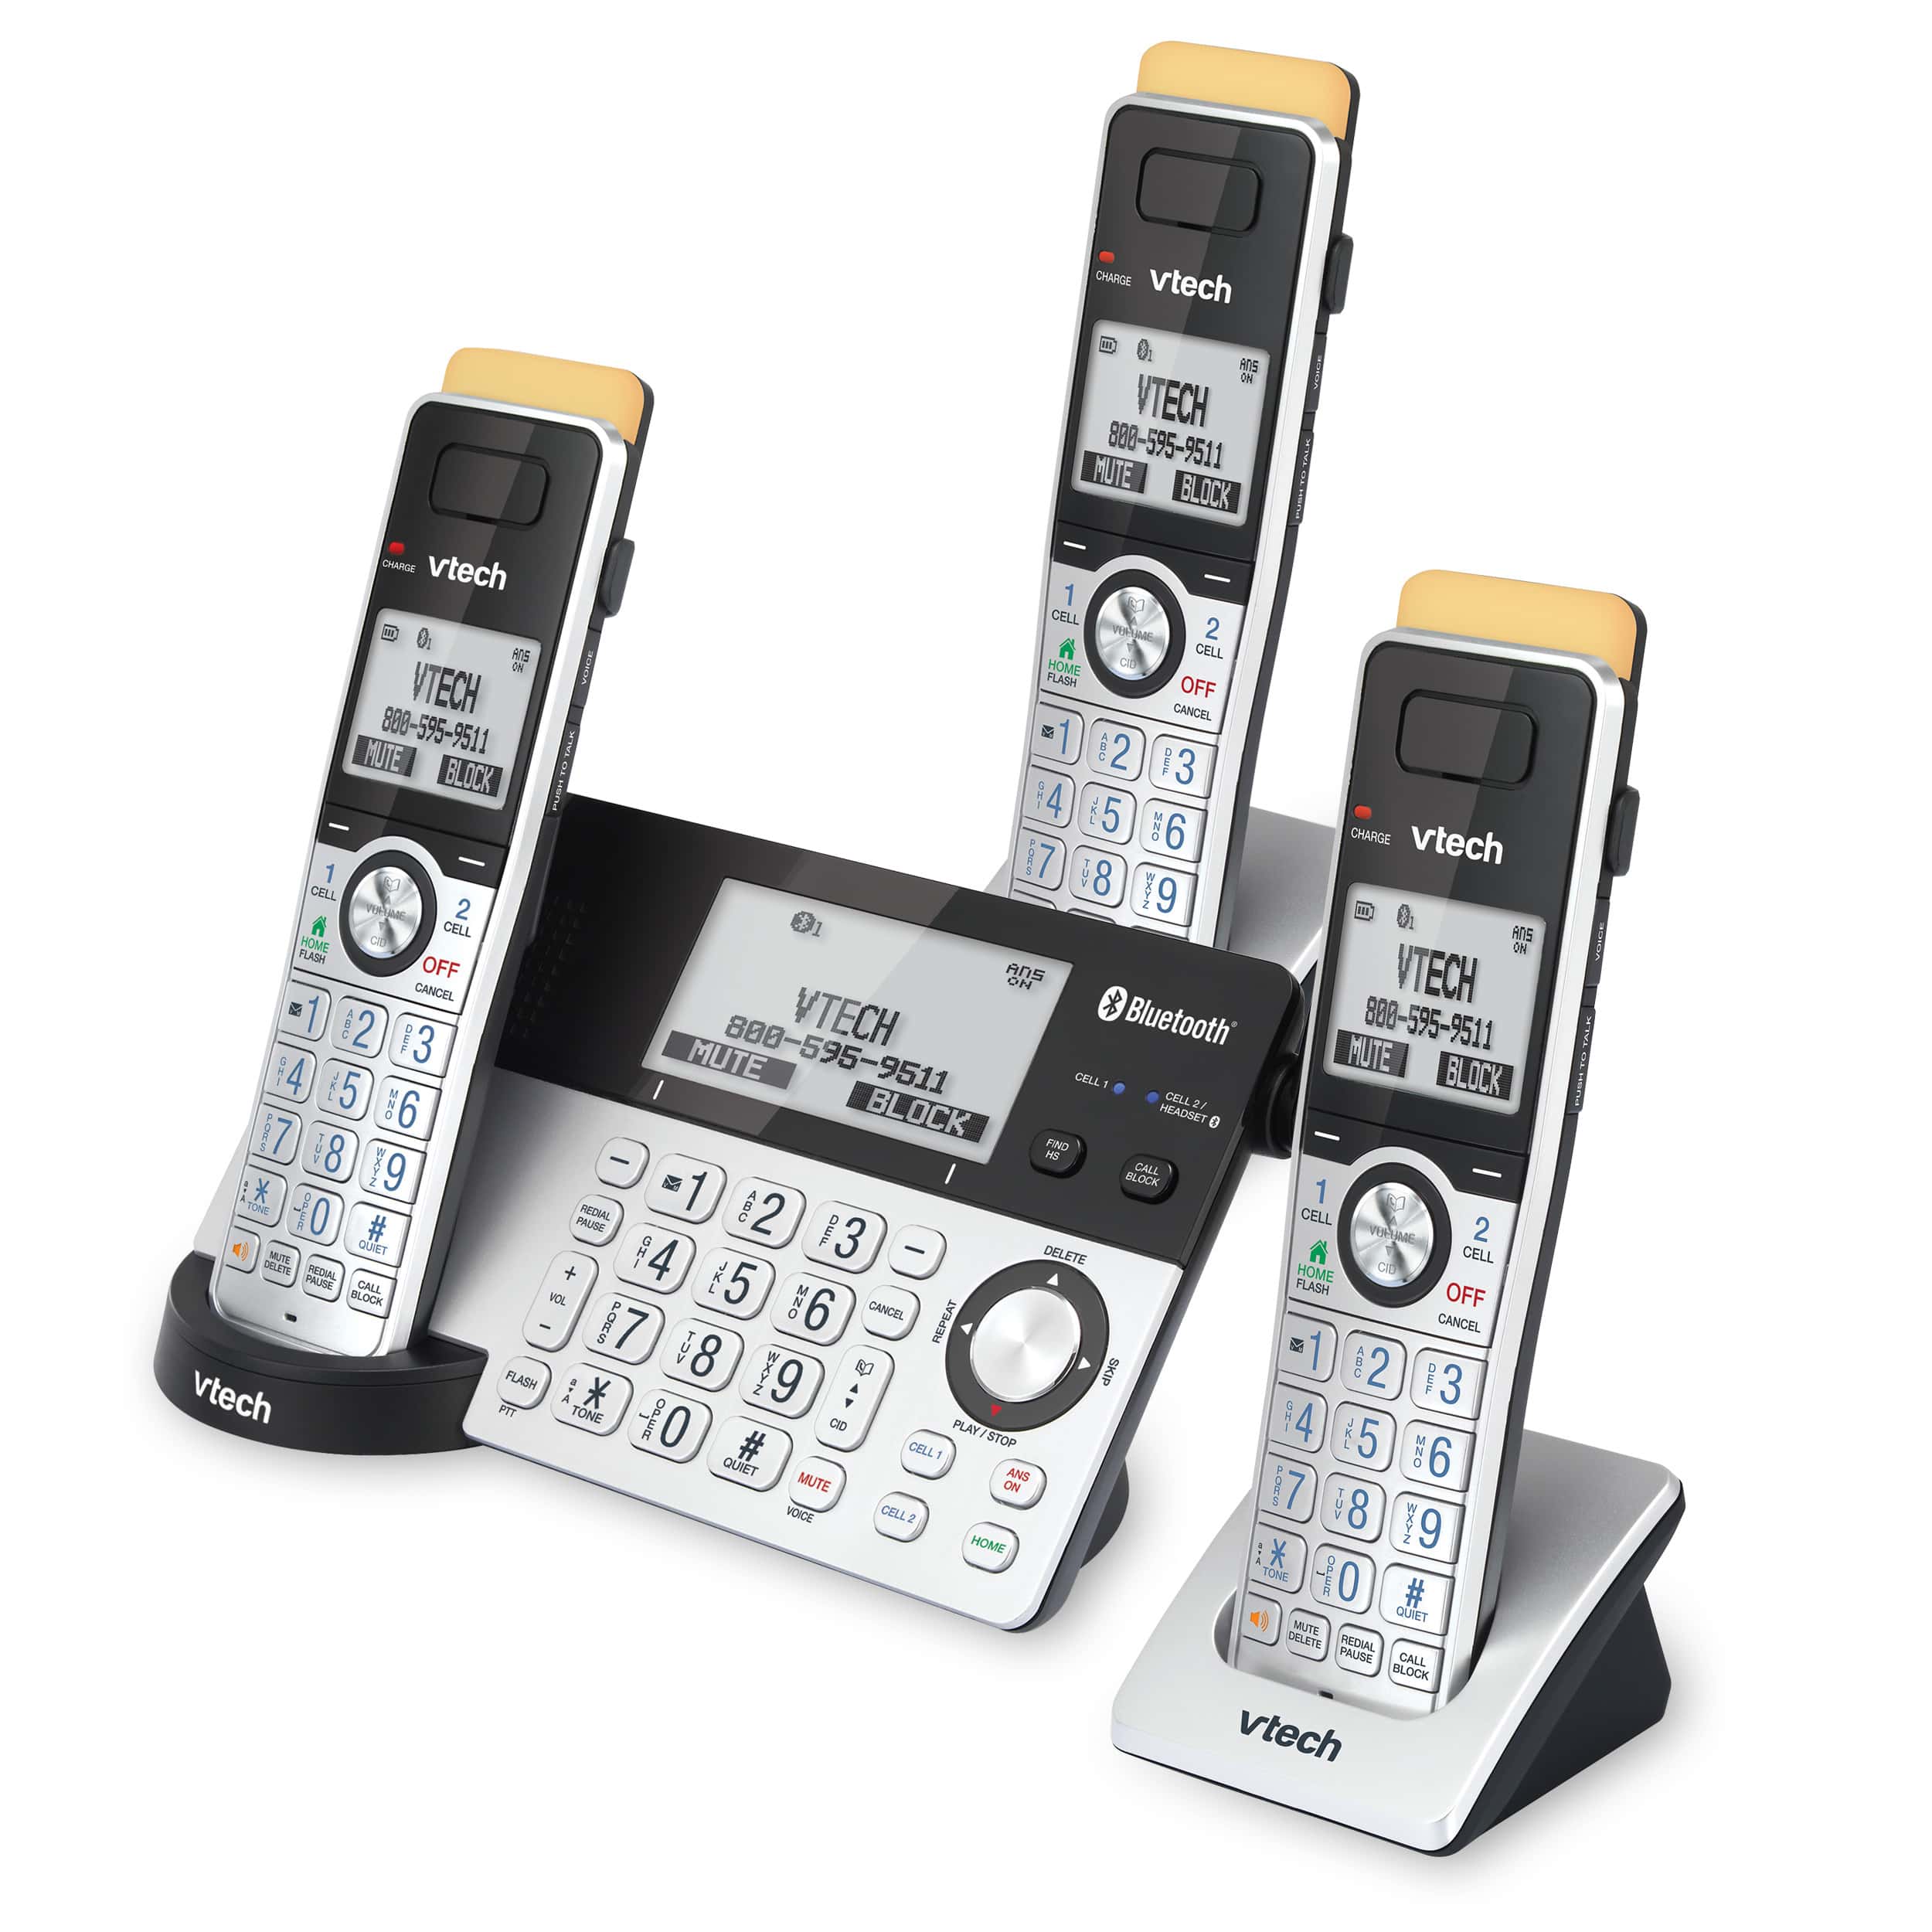 3-Handset Expandable Cordless Phone with Super Long Range, Bluetooth Connect to Cell, Smart Call Blocker and Answering System, IS8151-3